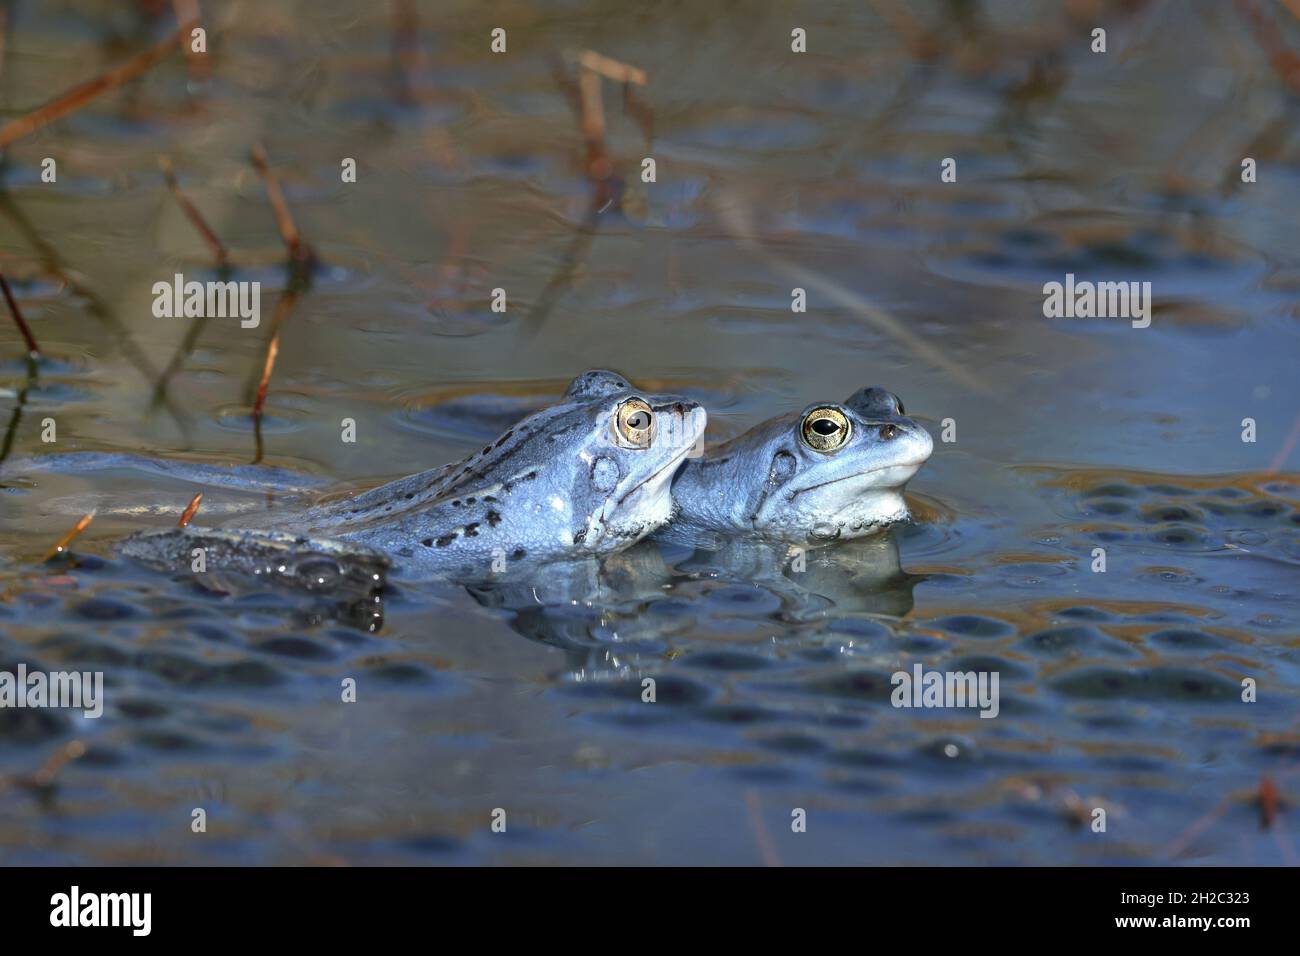 moor frog (Rana arvalis), Two blue males surrounded by spawn in a moor pond, Netherlands, Frisia Stock Photo